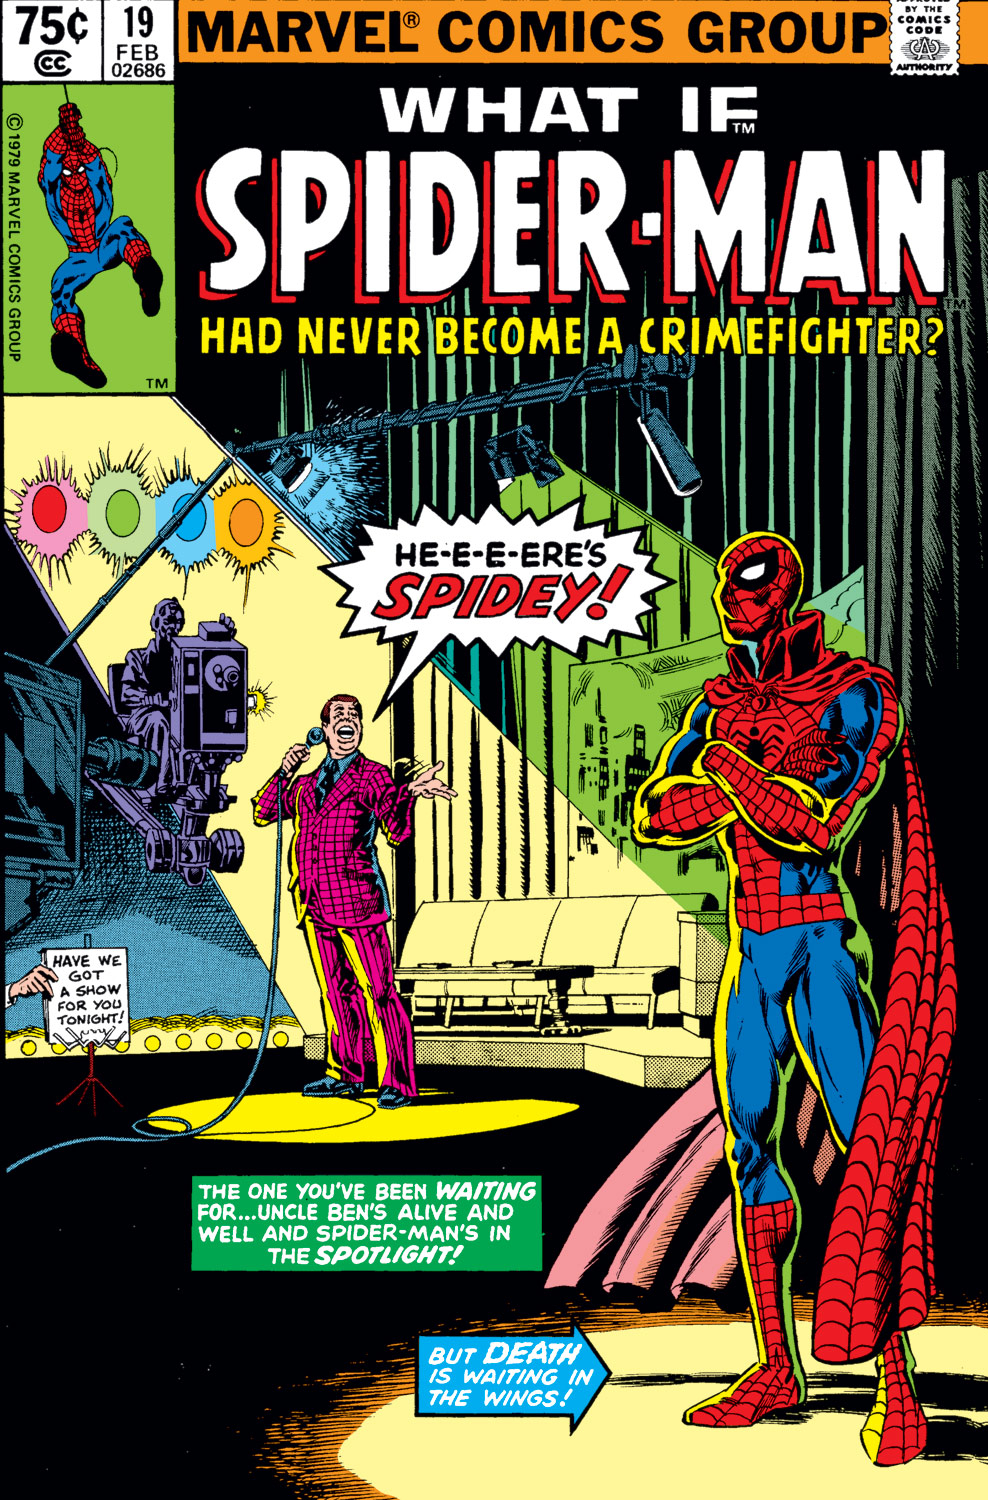 What If? (1977) issue 19 - Spider-Man had never become a crimefighter - Page 1